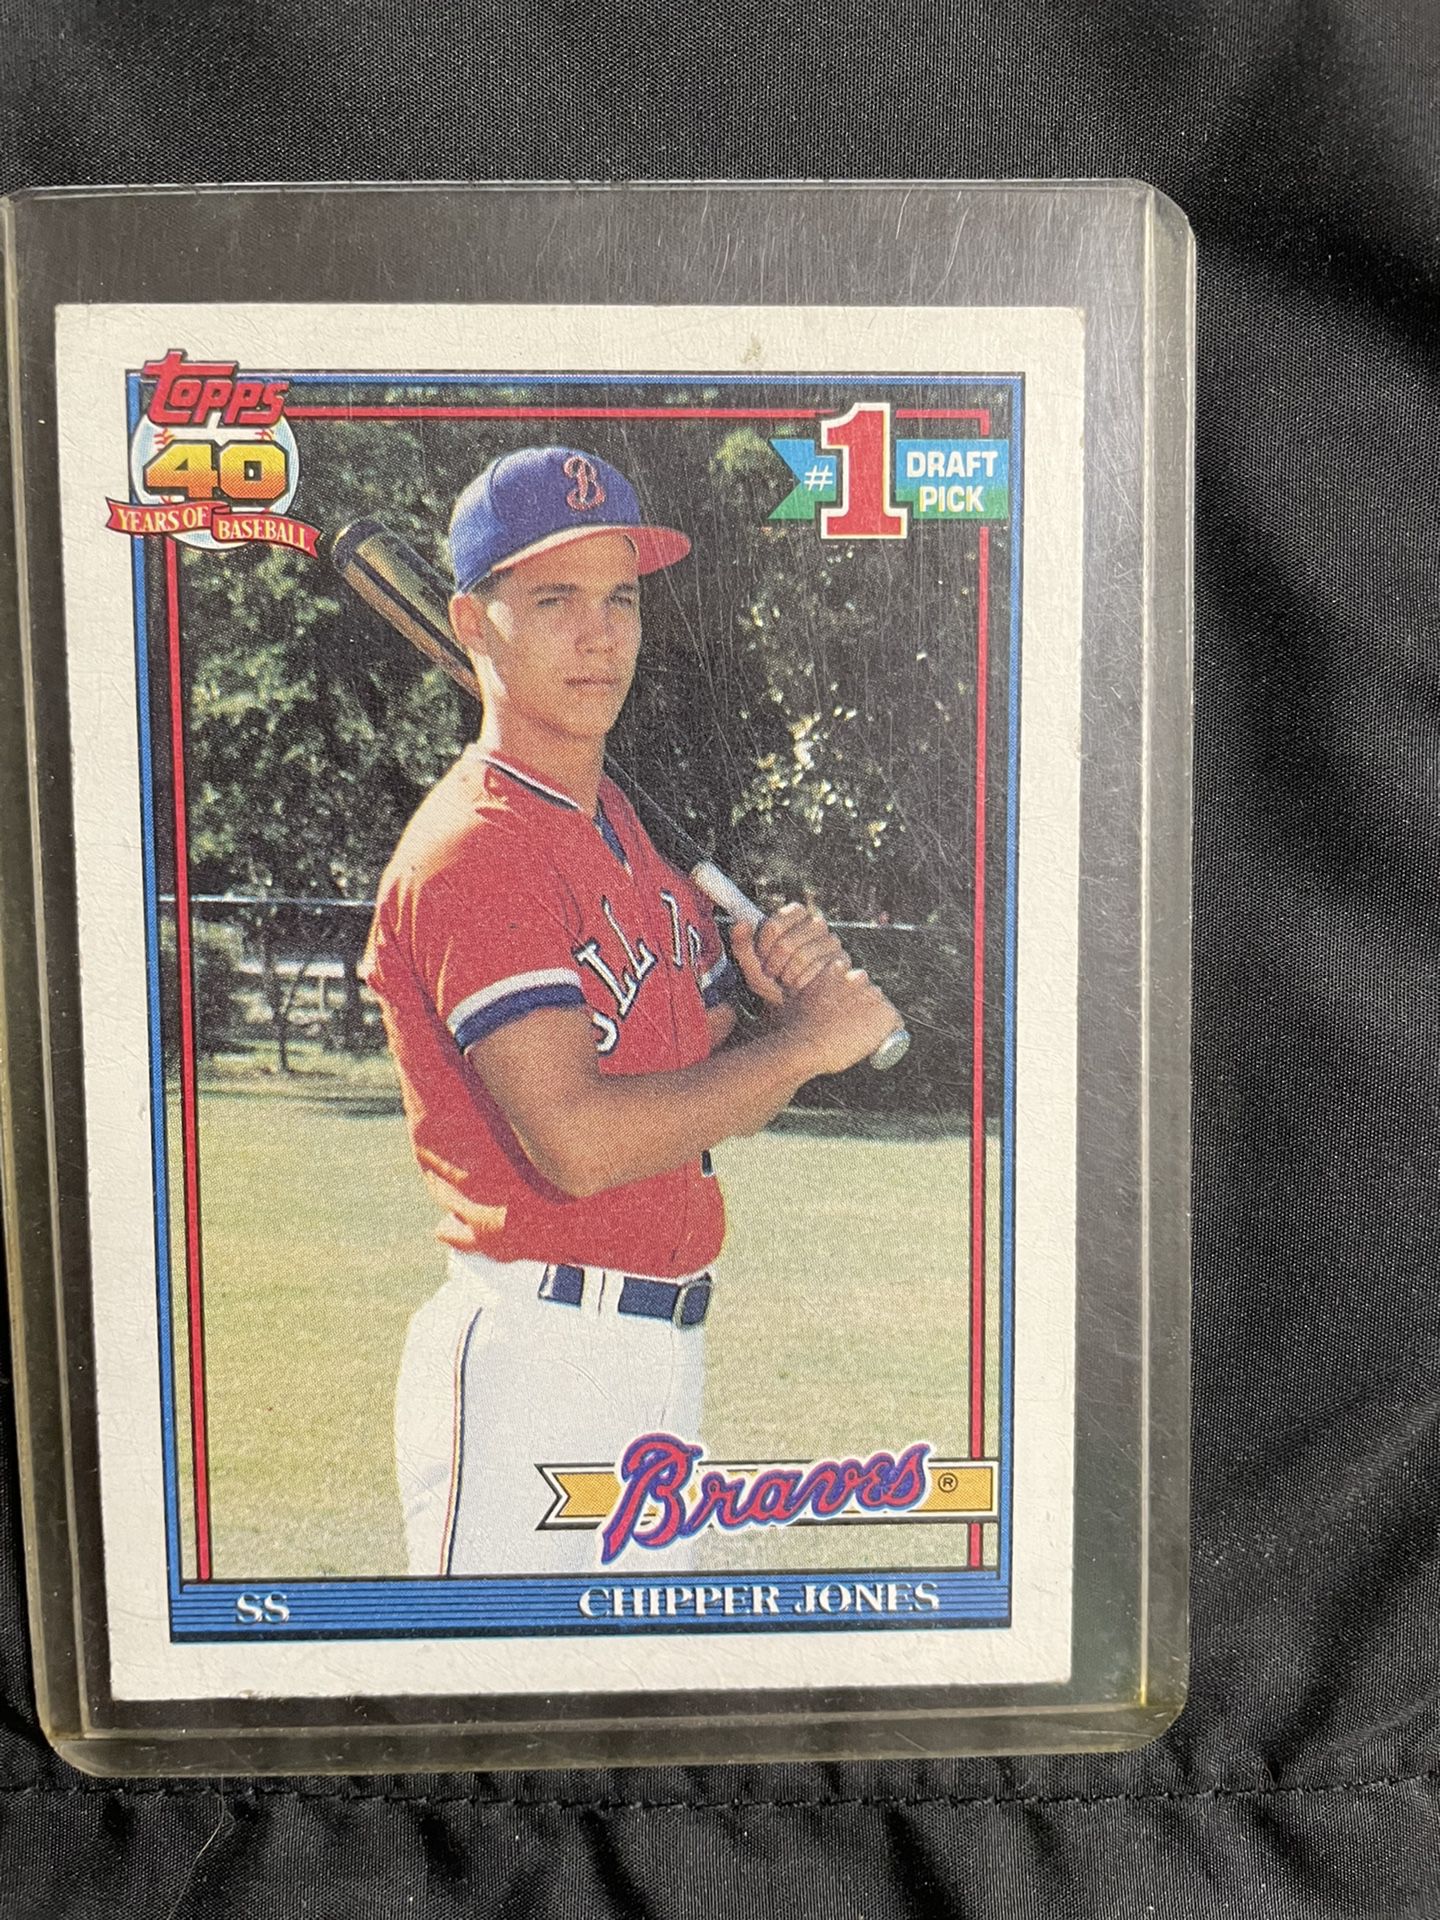 1989 Toppes Chipper Jones Rookie Card for Sale in Columbus, NC - OfferUp